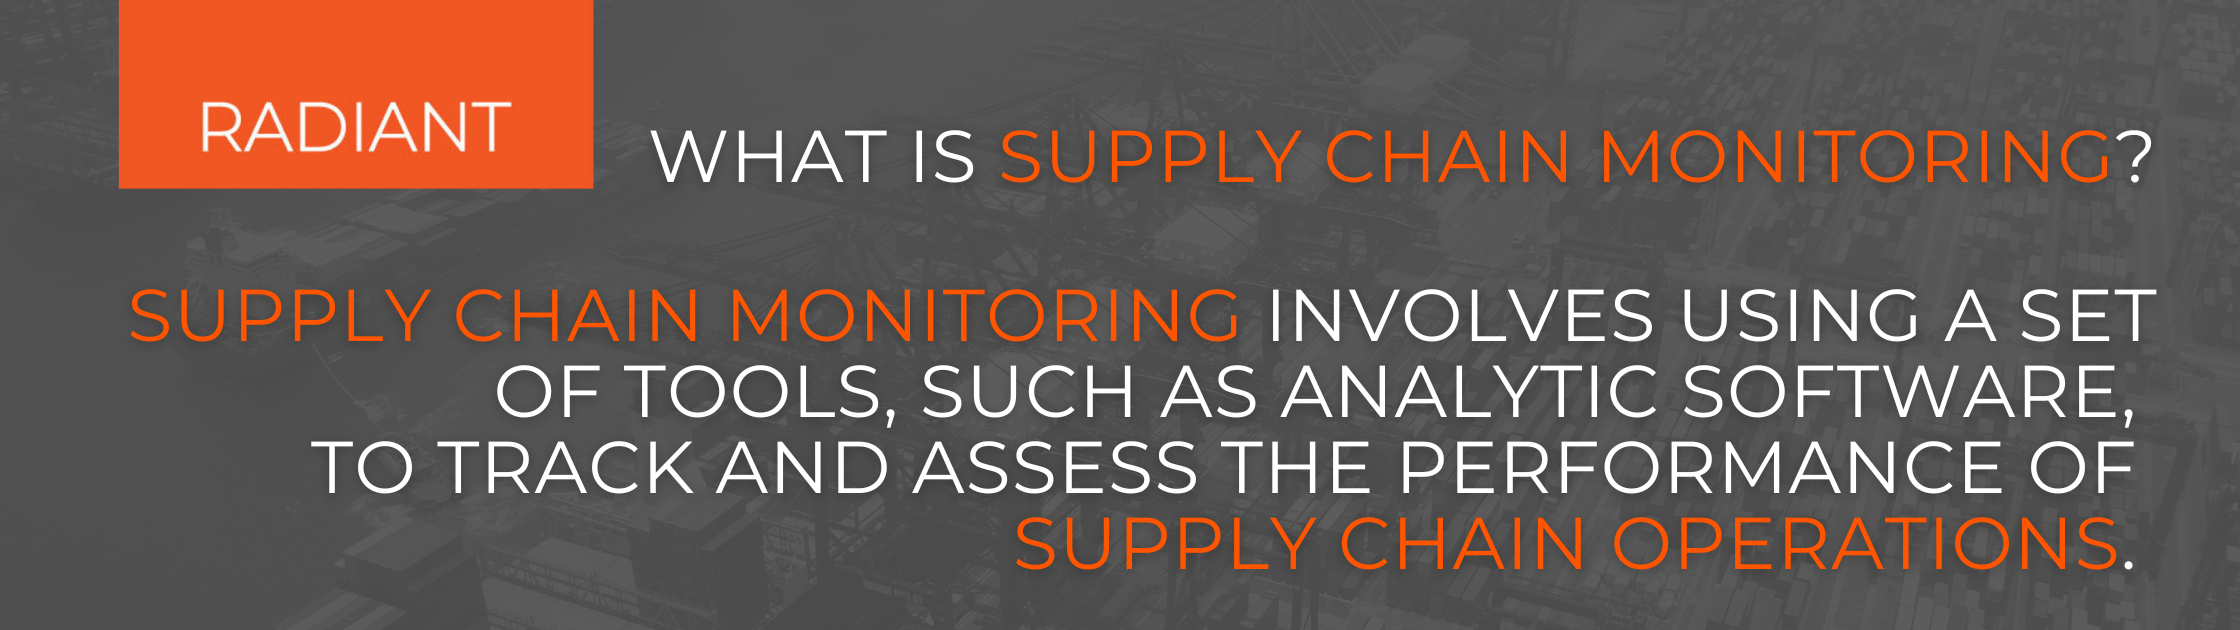 What Is Supply Chain Monitoring - Supply Chain Monitoring - Supply Chain Monitoring Tools - Supply Chain Monitoring Software - Supply Chain Monitoring System - Supply Chain Risk Monitoring - Supply Chain And Logistics Monitoring - How To Monitor Supply Chain Performance - Monitoring Supply Chain Performance - Supply Chain Management